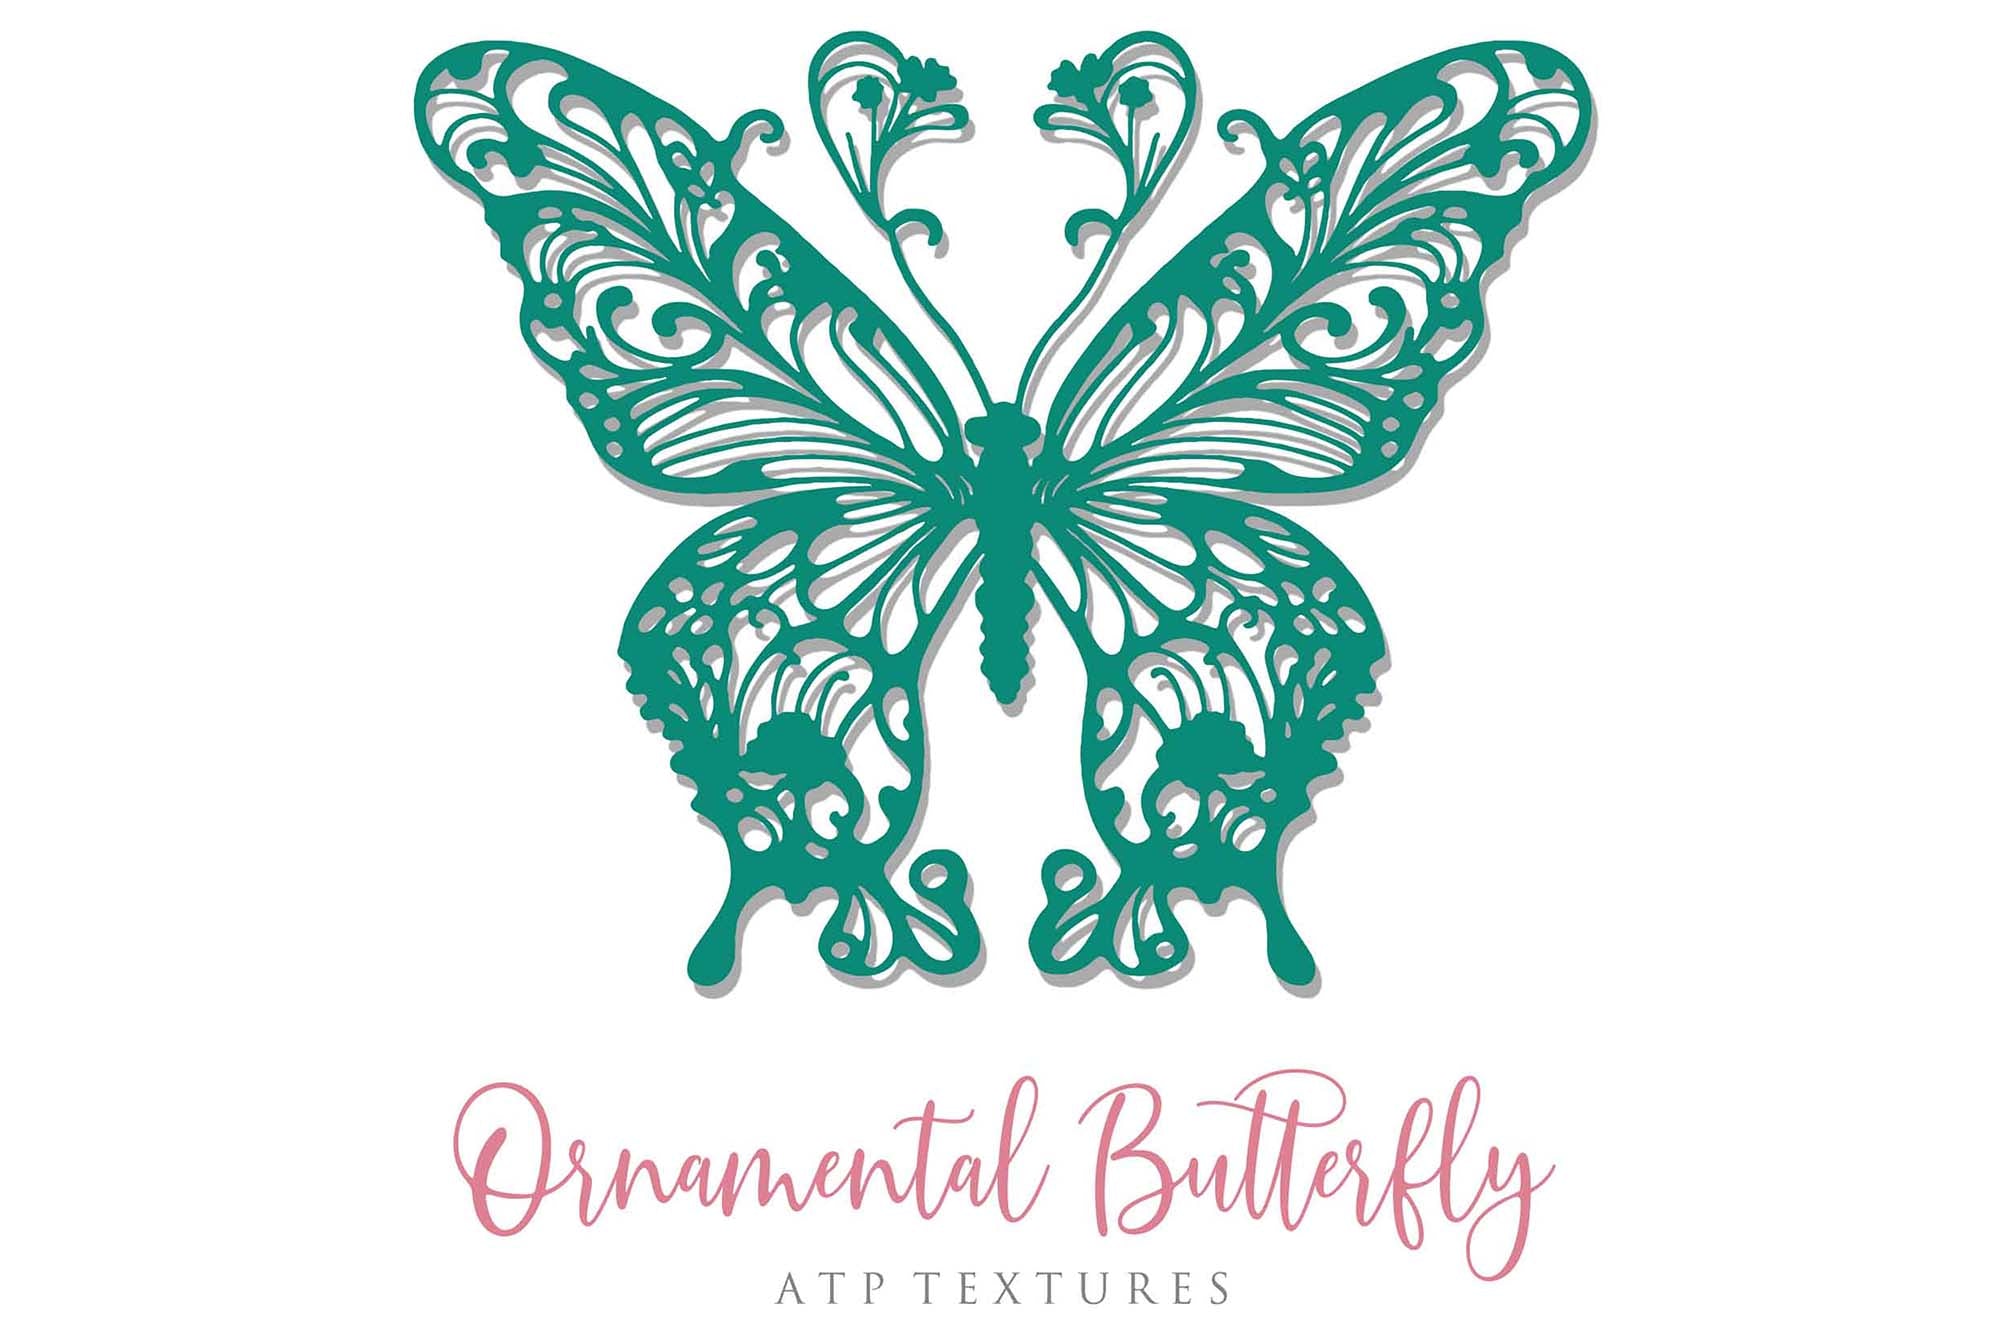 Ornamental Butterfly Clipart.Svg Clipart. Svg, Png Clipart for Cricut or Silhouette Cameo. Sublimation art.  Cut or Print. High resolution files.